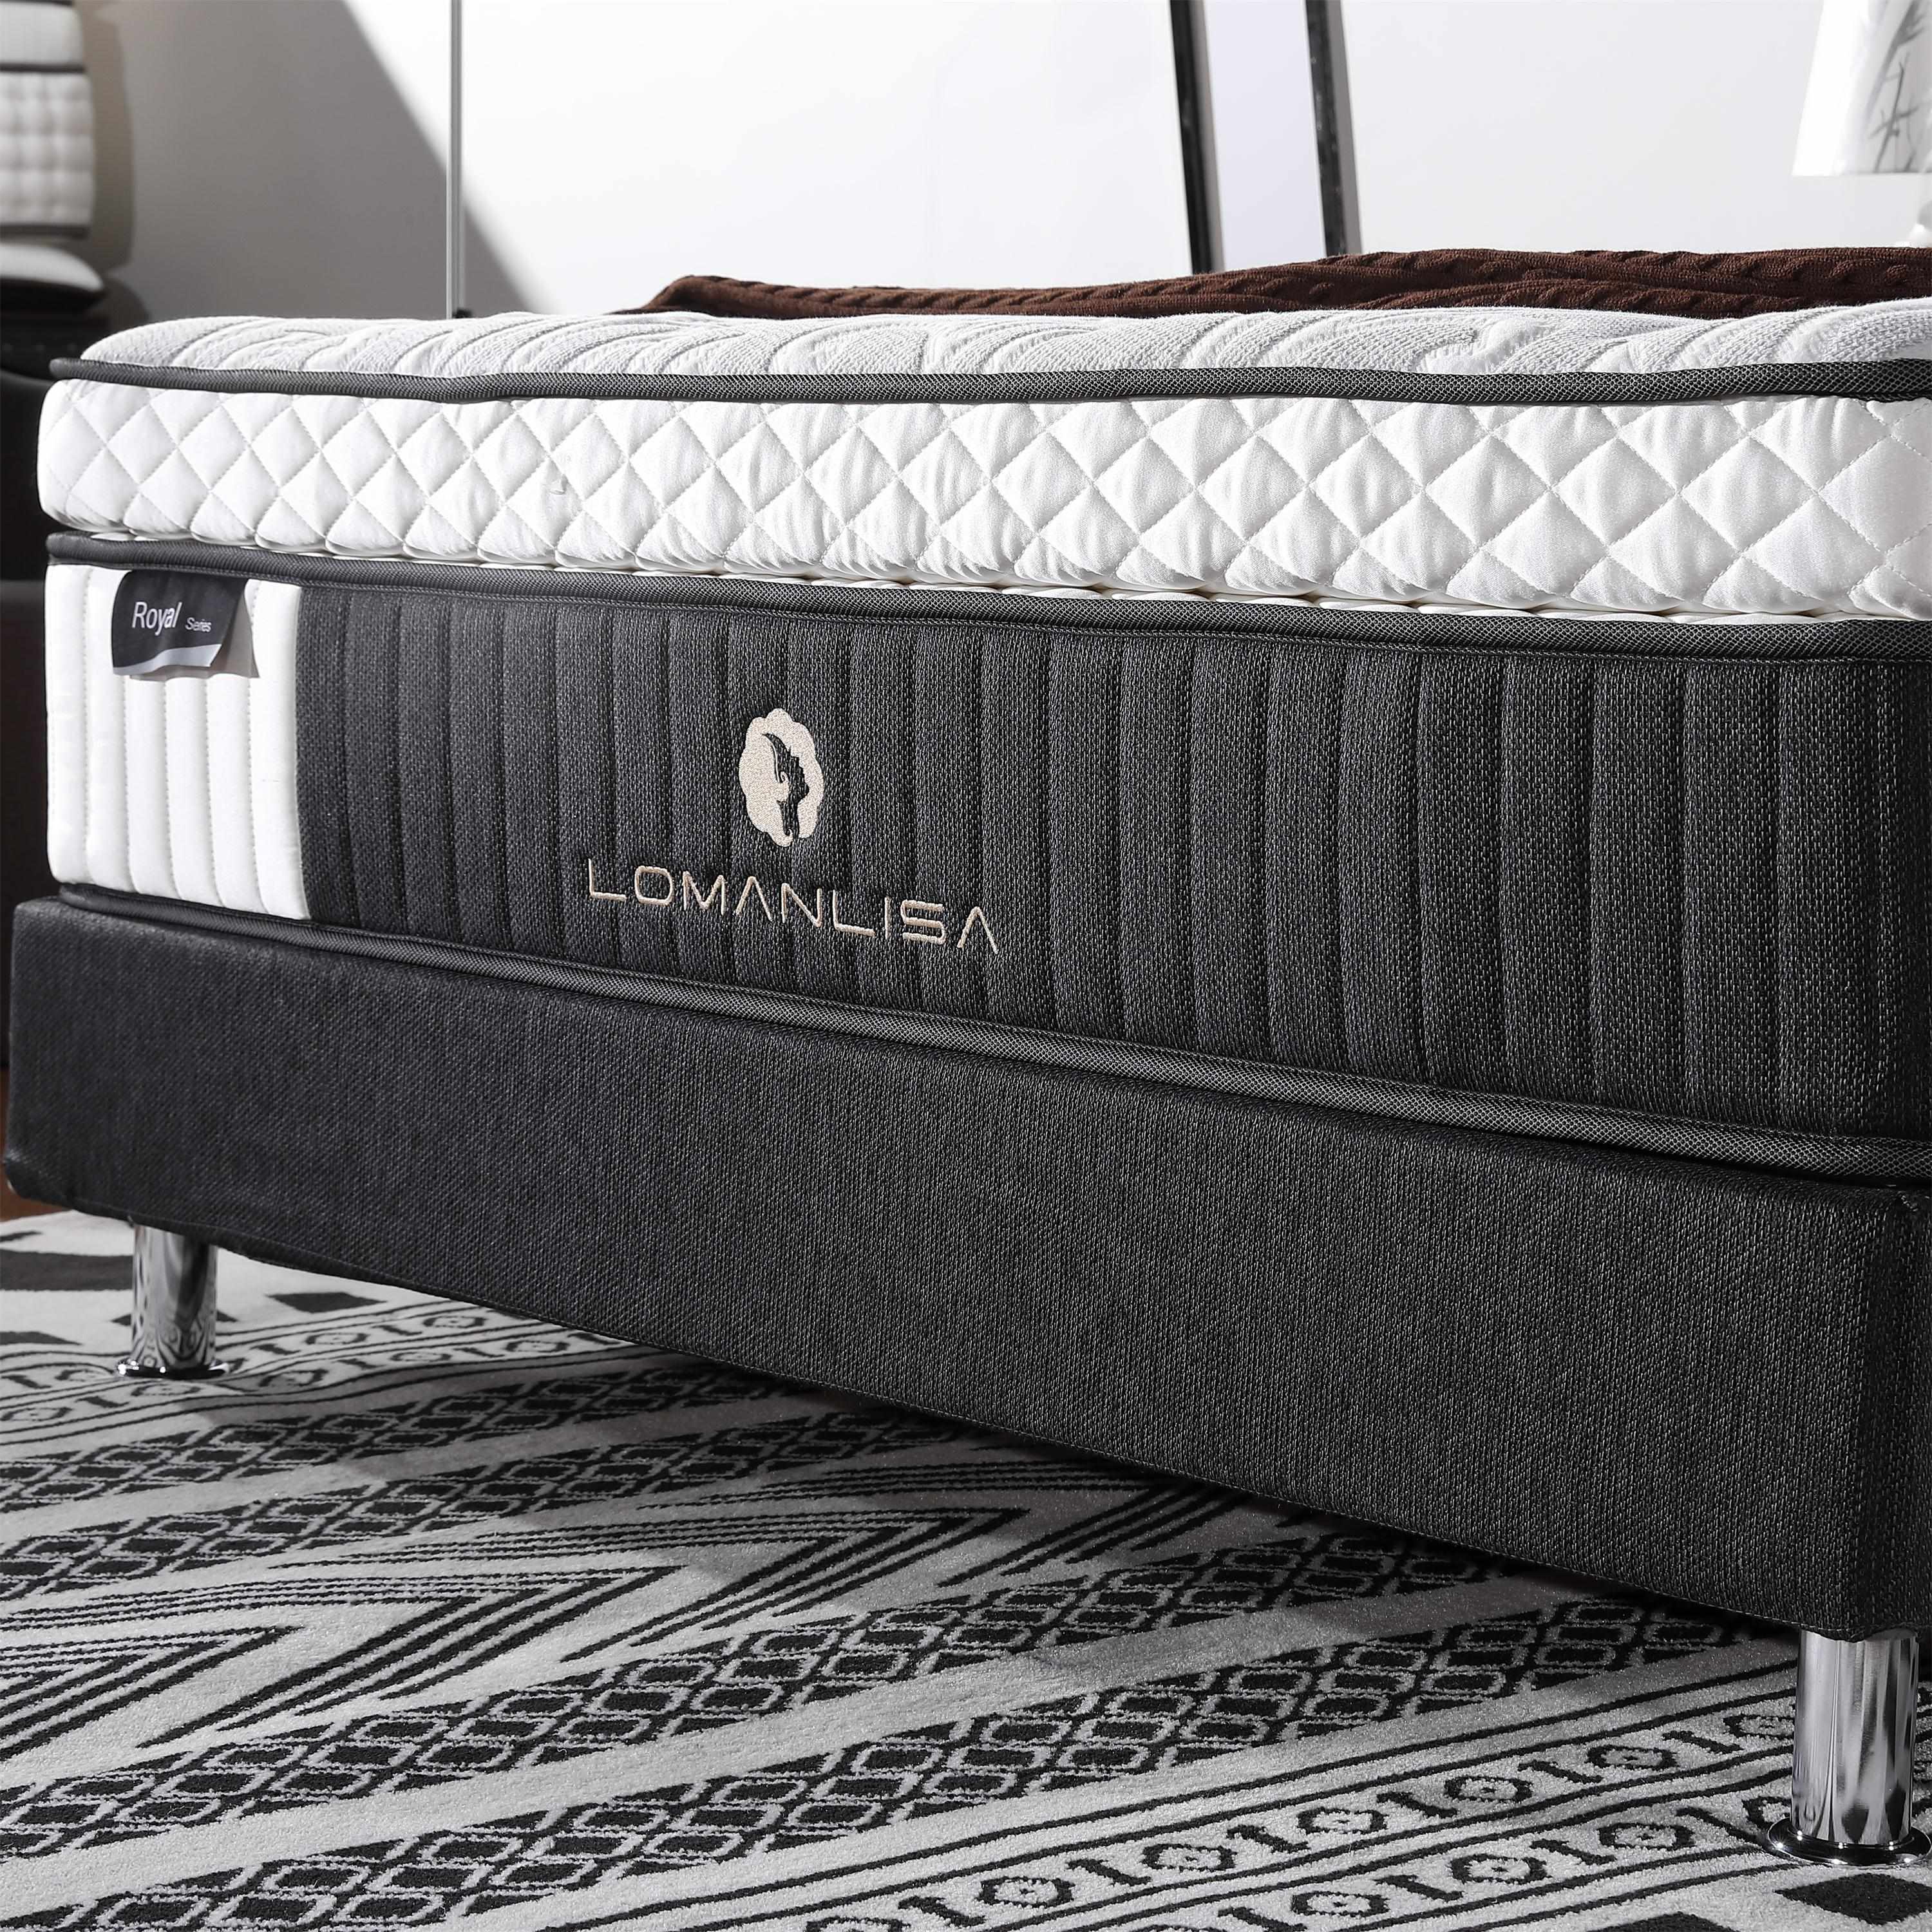 JLH-Double Layers 5 Zoned Pocket Spring Luxury Design with Convoluted Foam and High Quality Knitted 